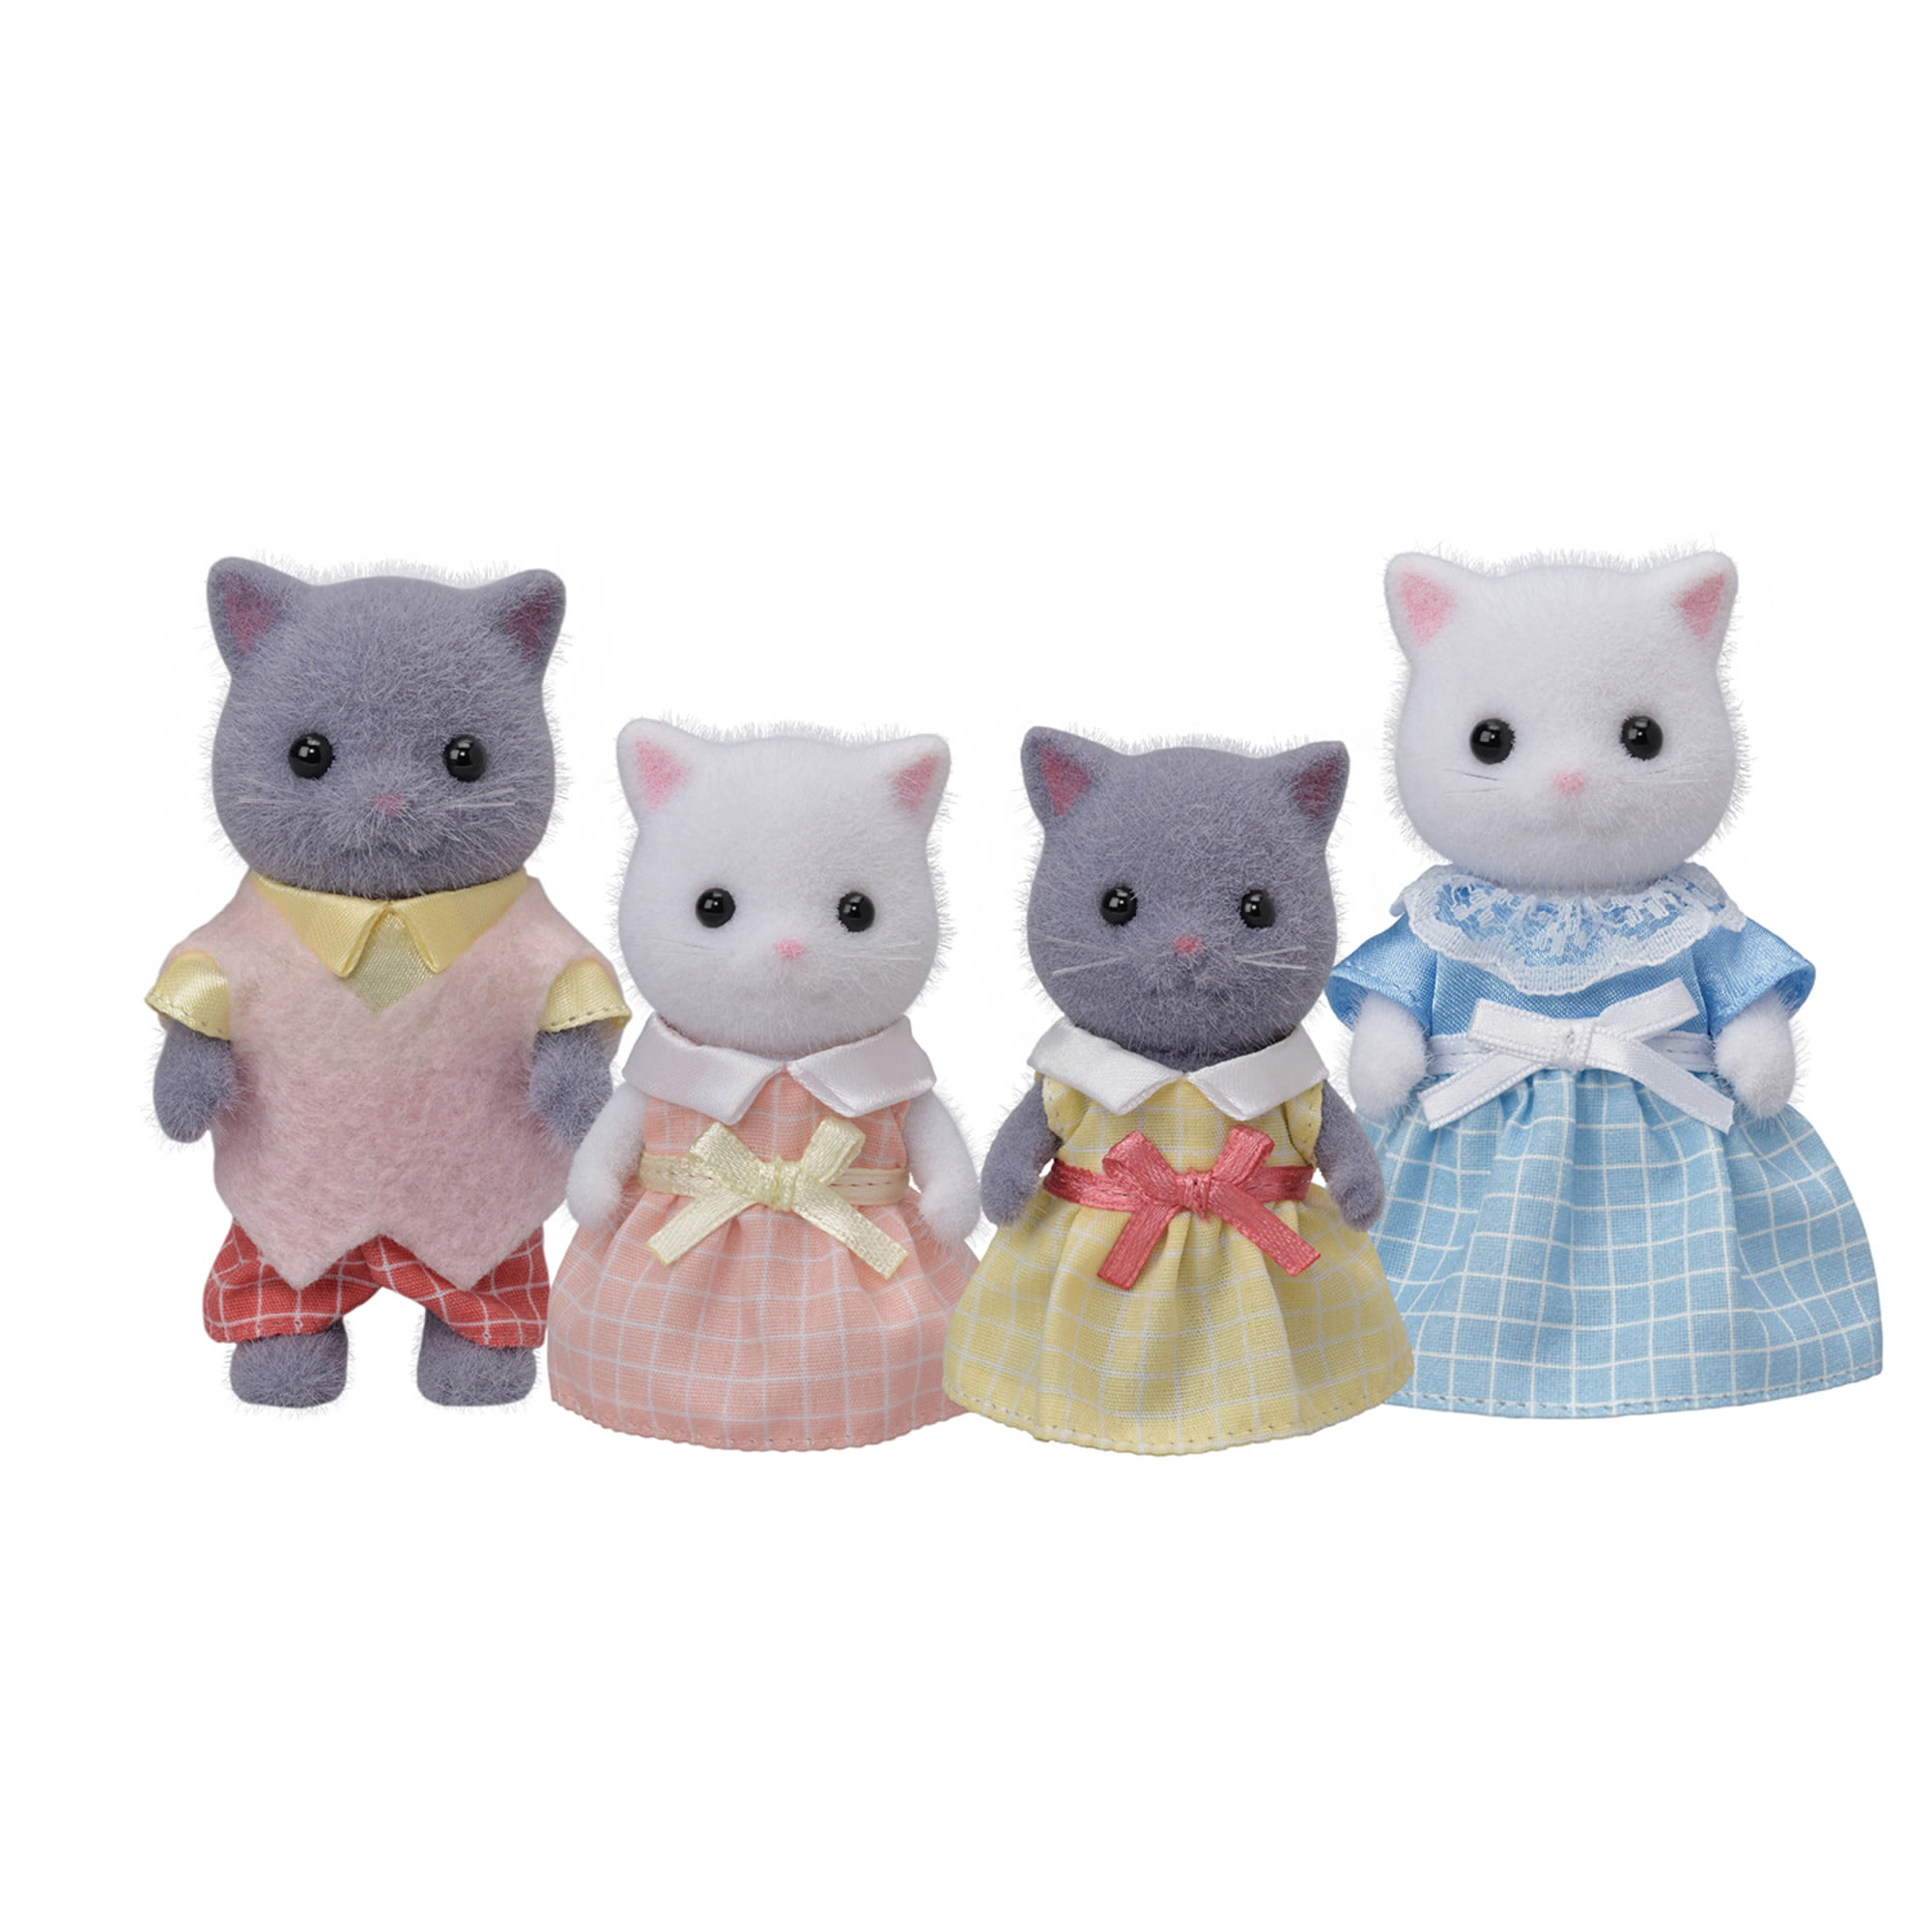 Calico Critters Cat Kitten Animal Family 4 Pc Kids Toy Gift Pretend Play NEW 